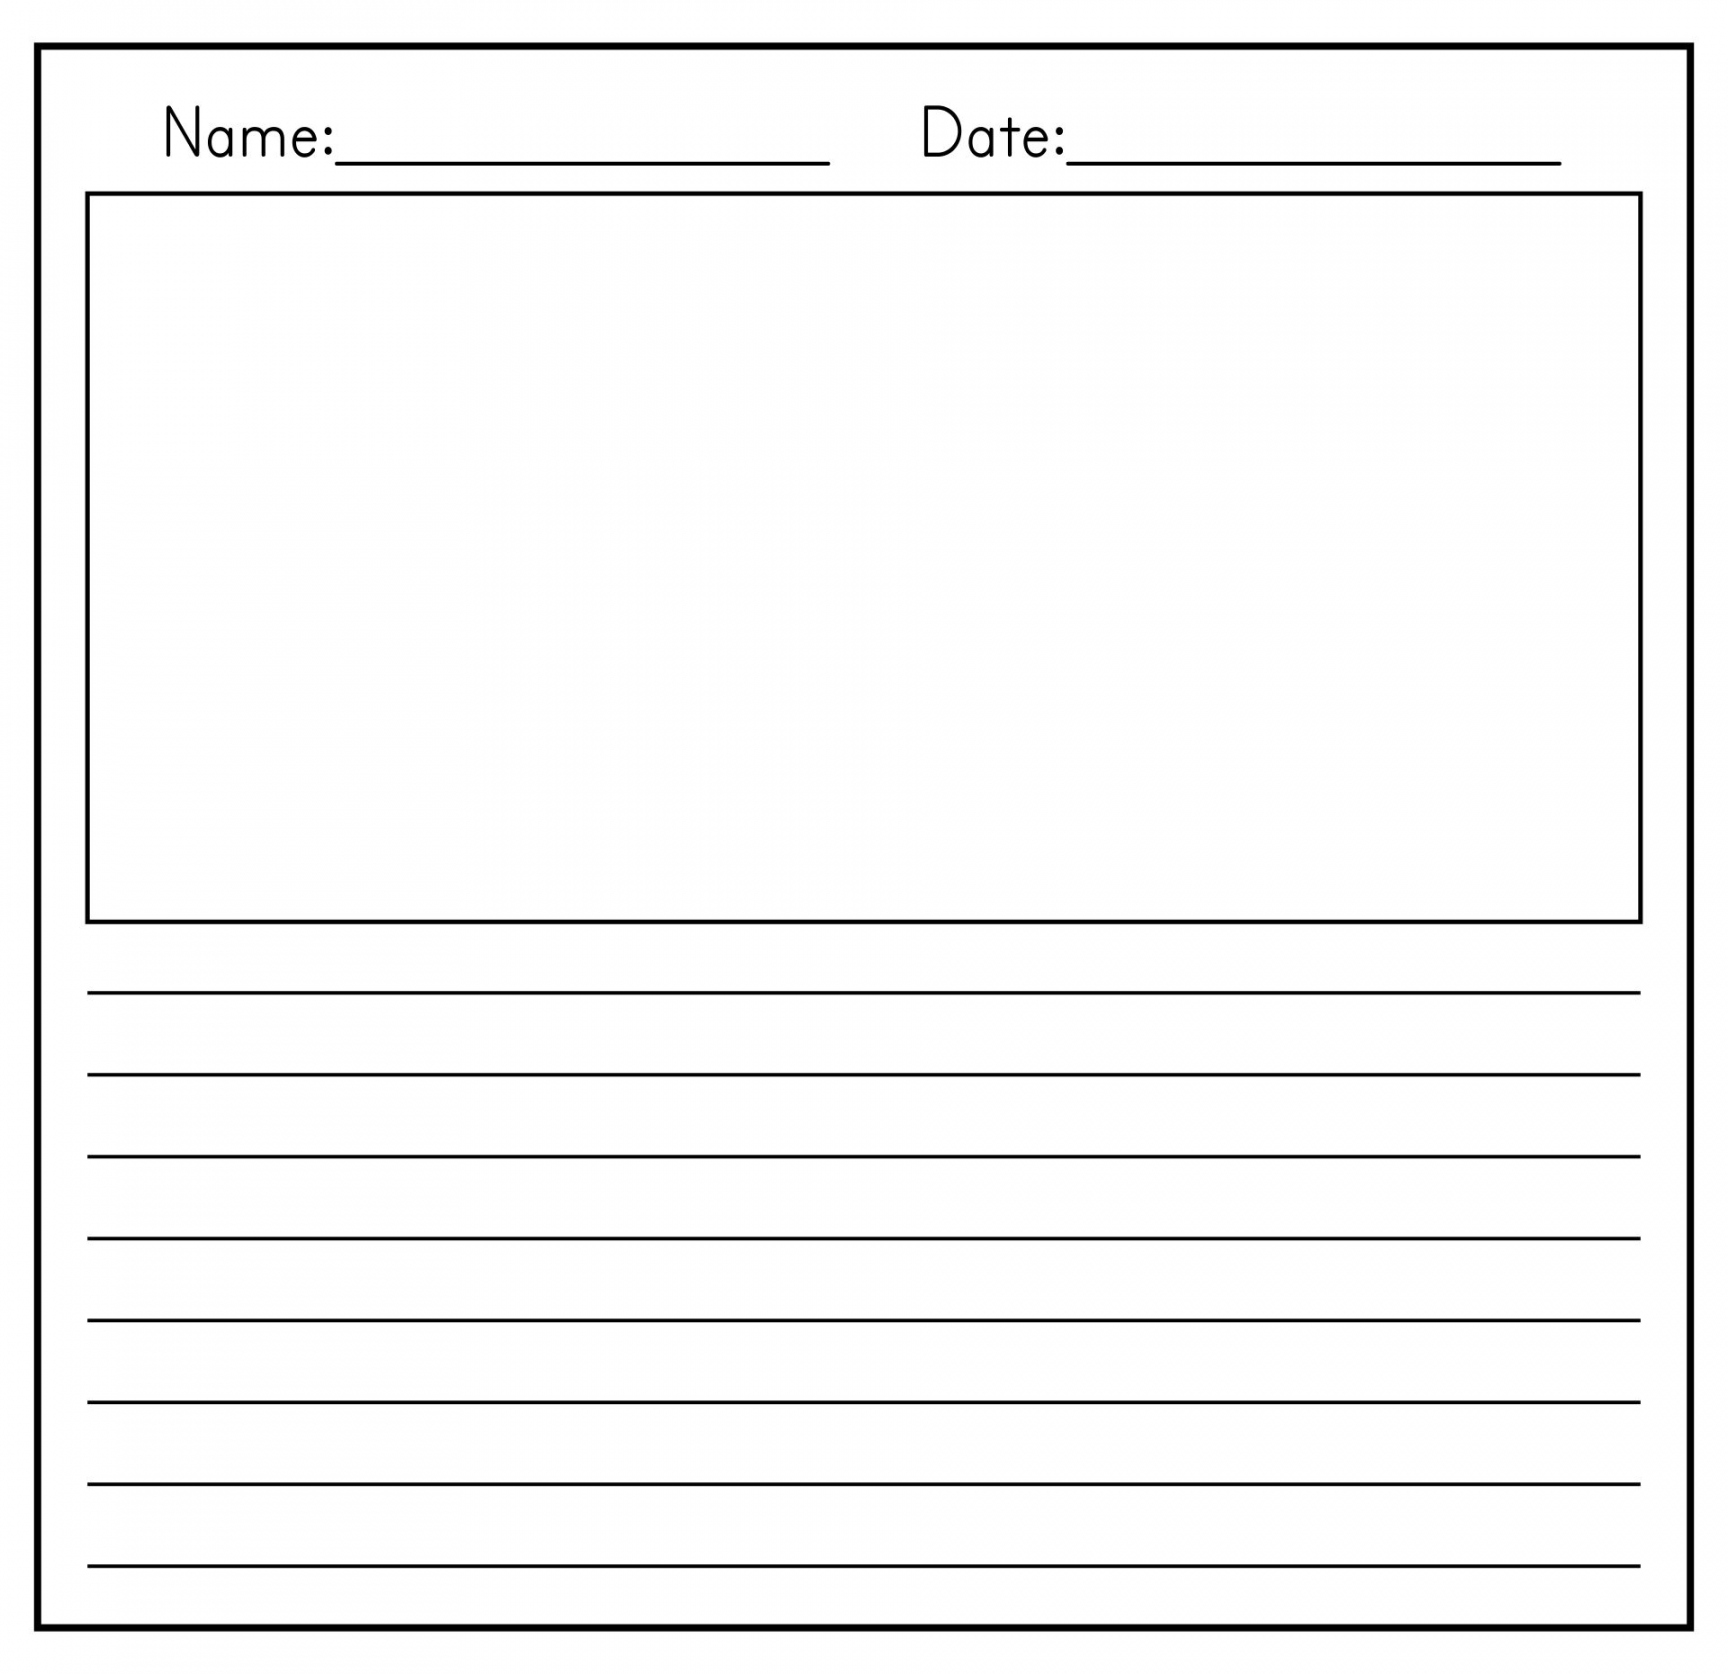 Best Printable Primary Writing Paper Template - printablee - Free Printable Lined Paper With Picture Box